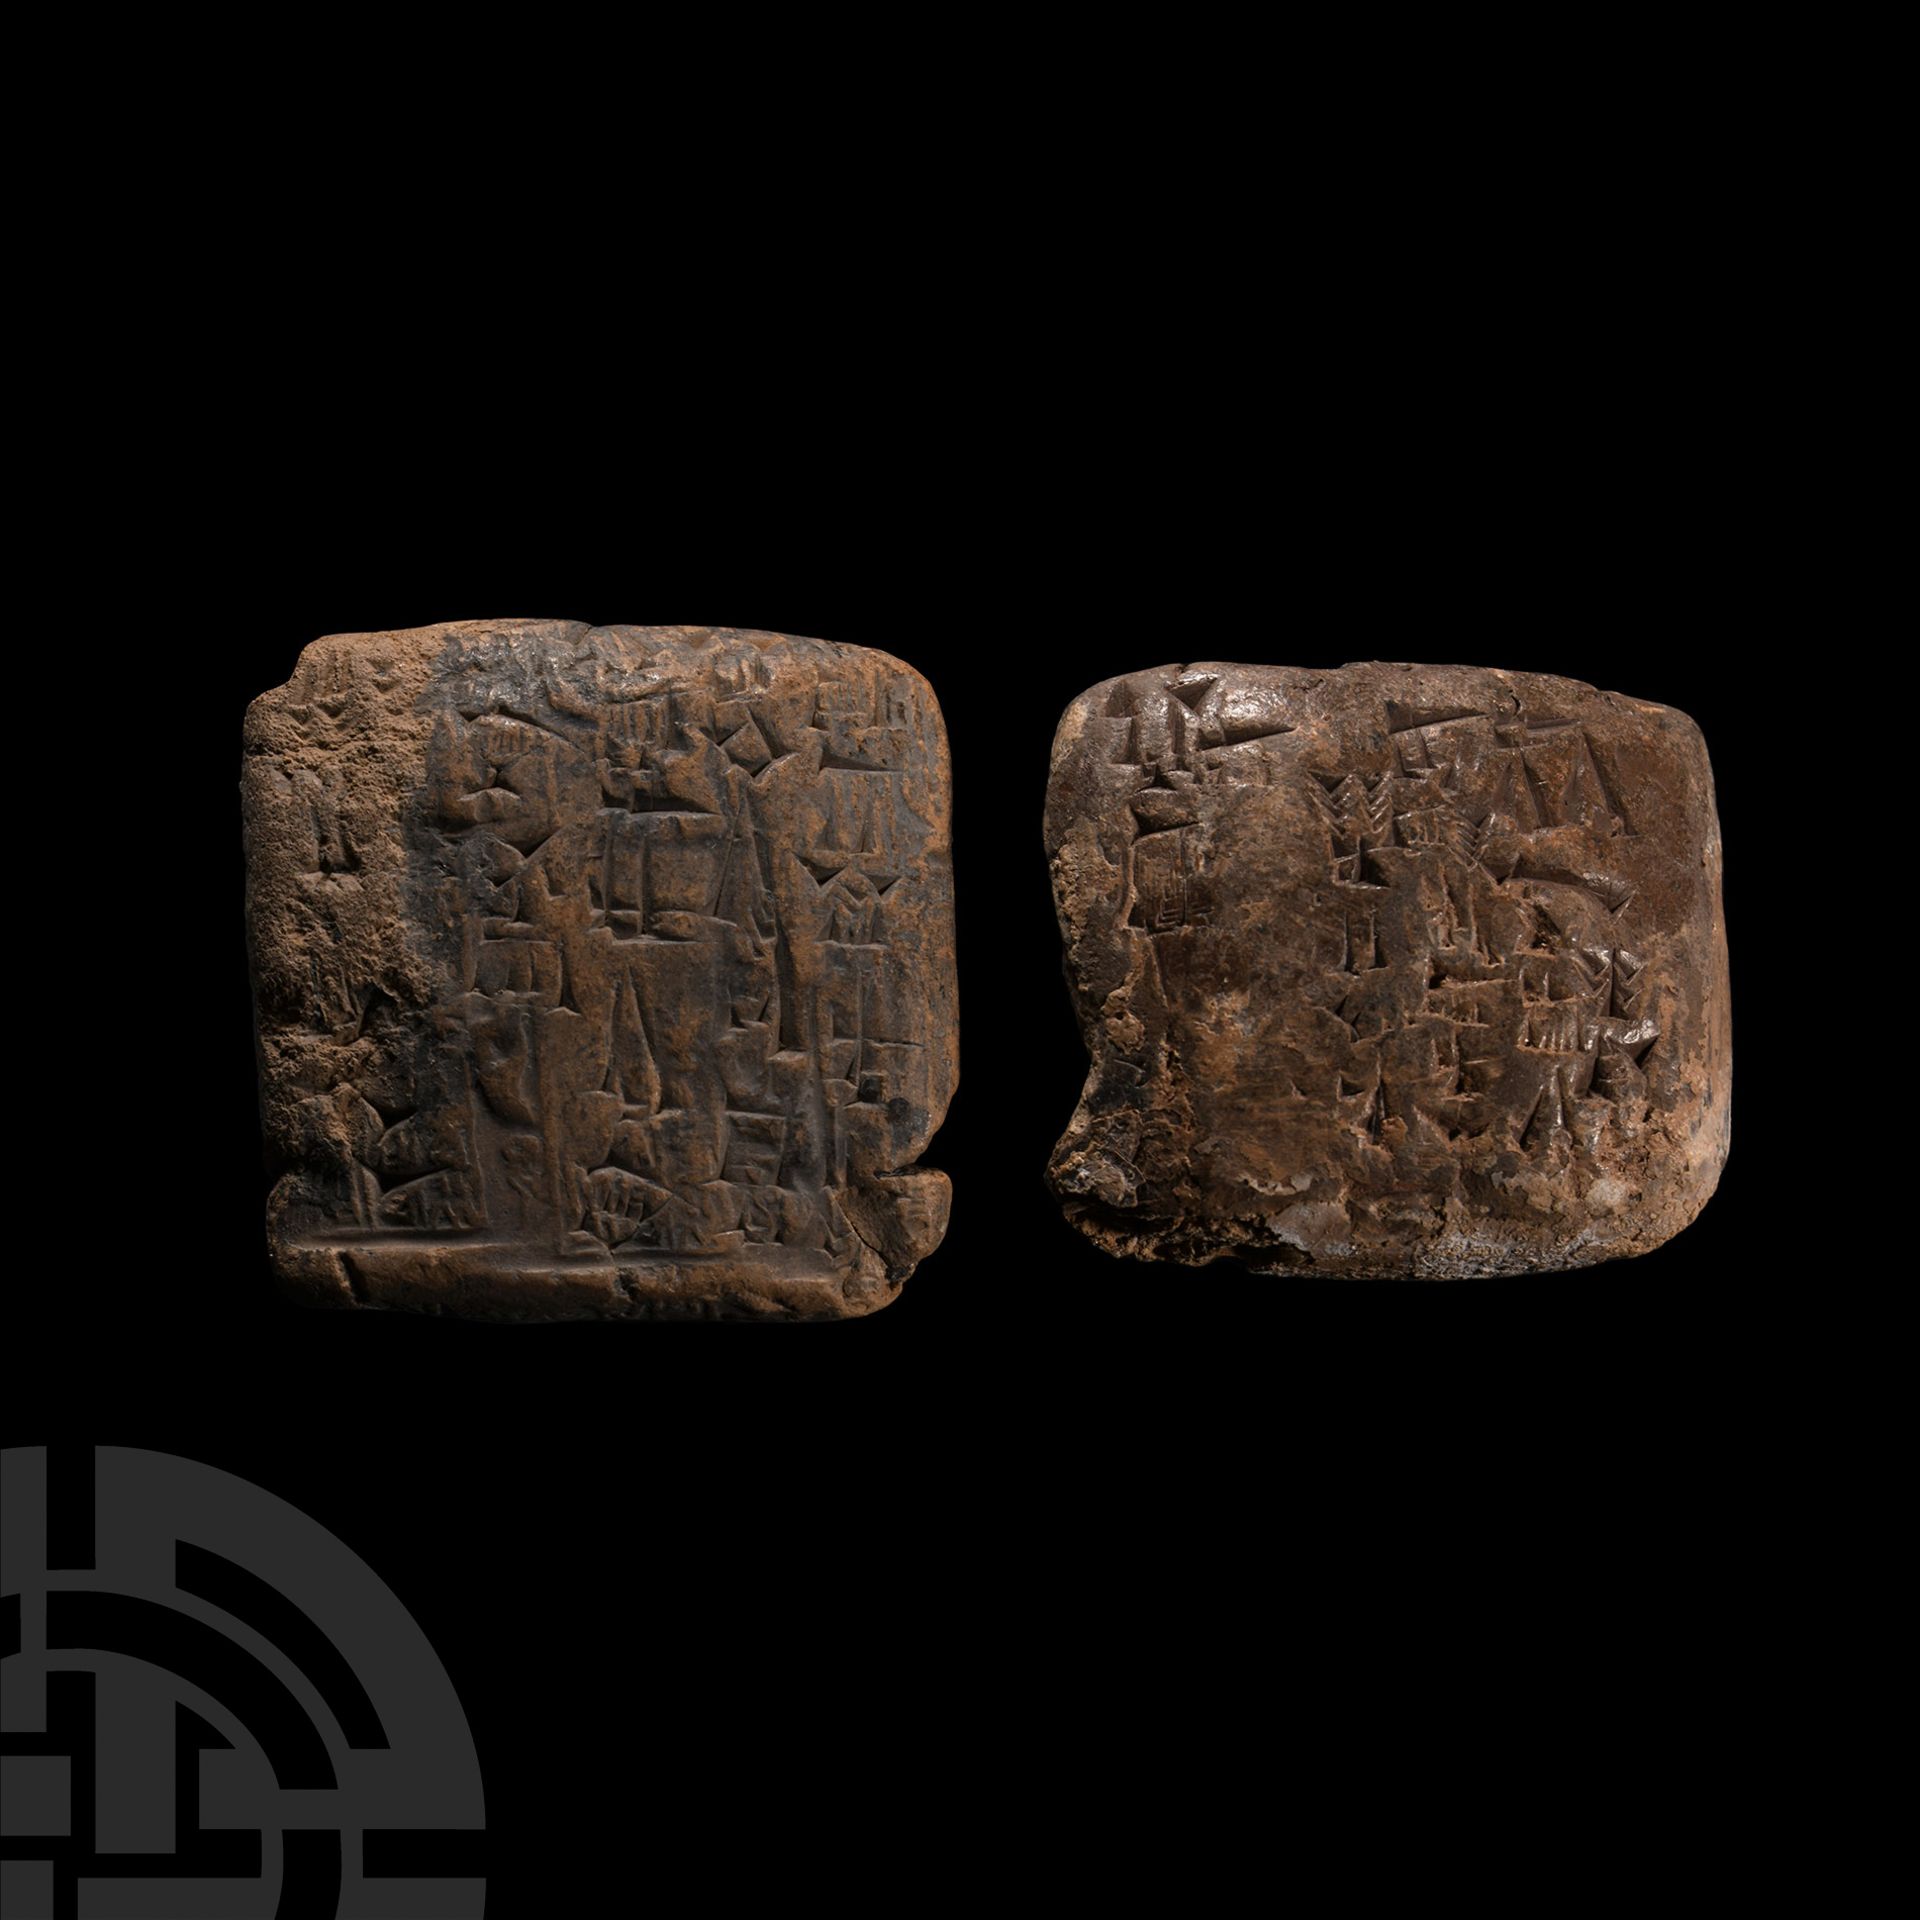 Mesopotamian Cuneiform Tablet Group with Administrative Tablet and a King Šu-Sin Tax Text